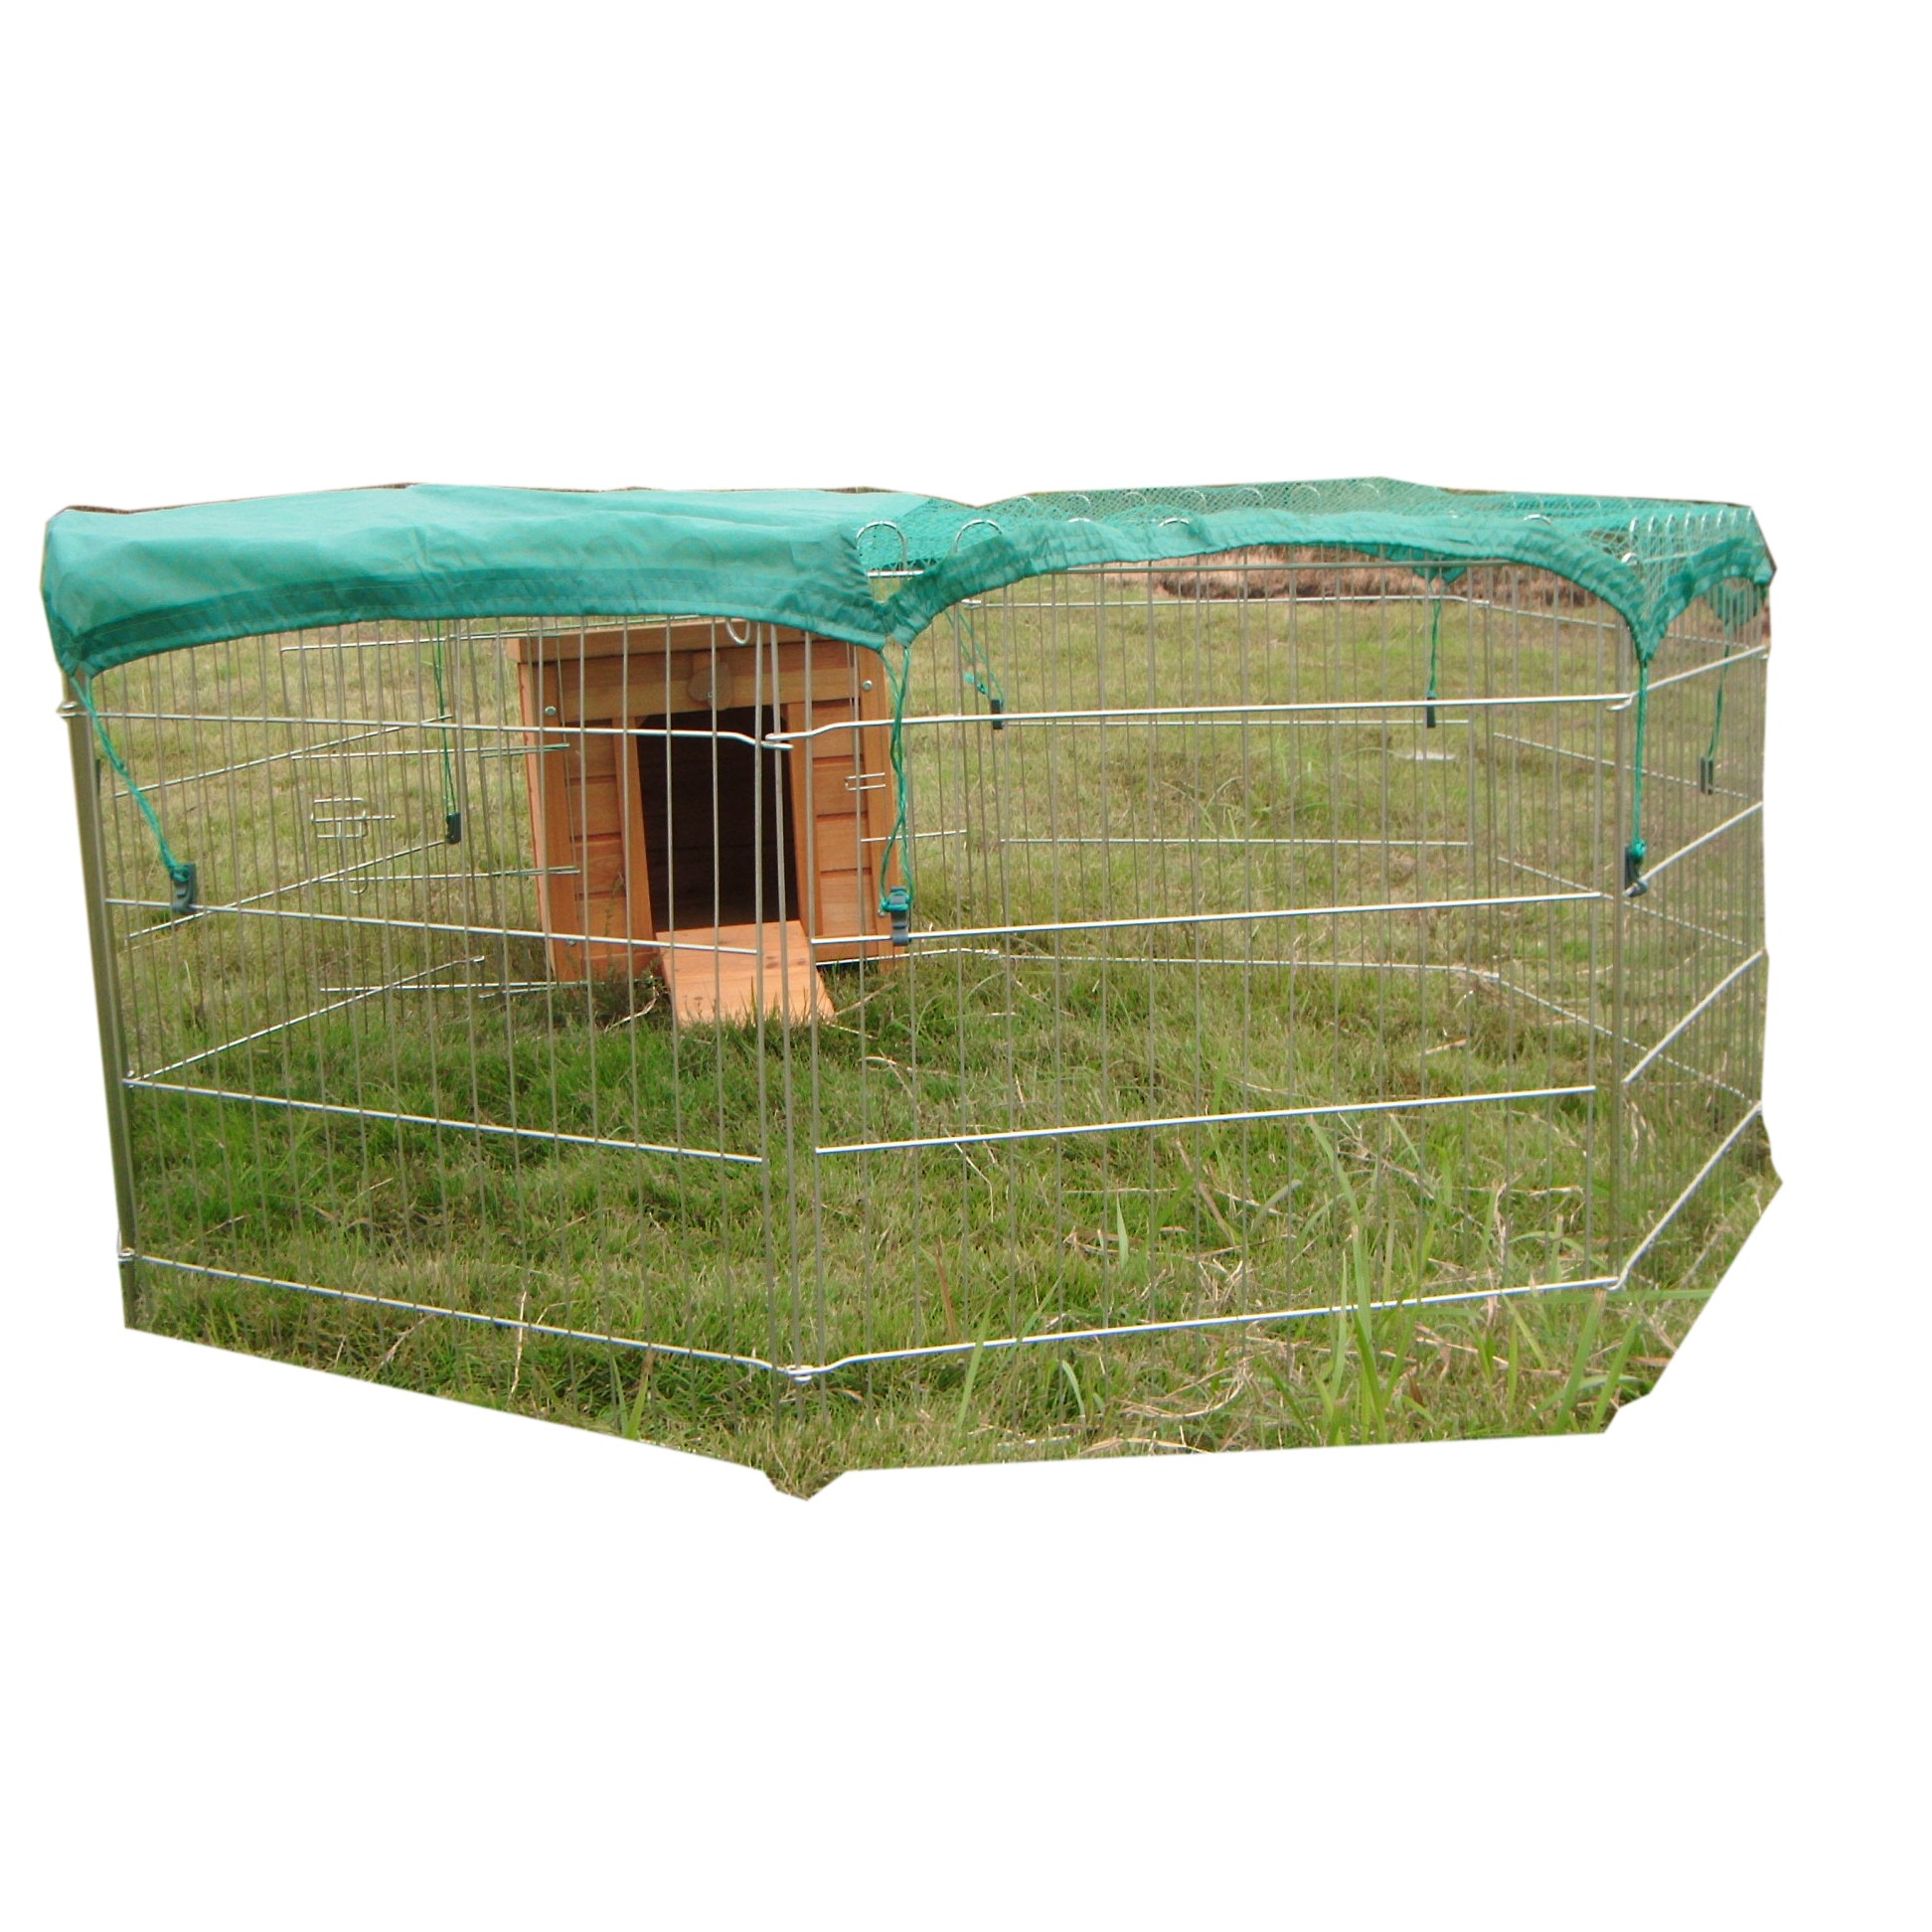 New Arrival China Outdoor Wooden Dog Kennels -
 1 x small hide house + 1 x Large Outdoor Octagon 55-inch pet Playpen Enclosure for Rabbit Puppy hutch wire animal Run Cages – Easy